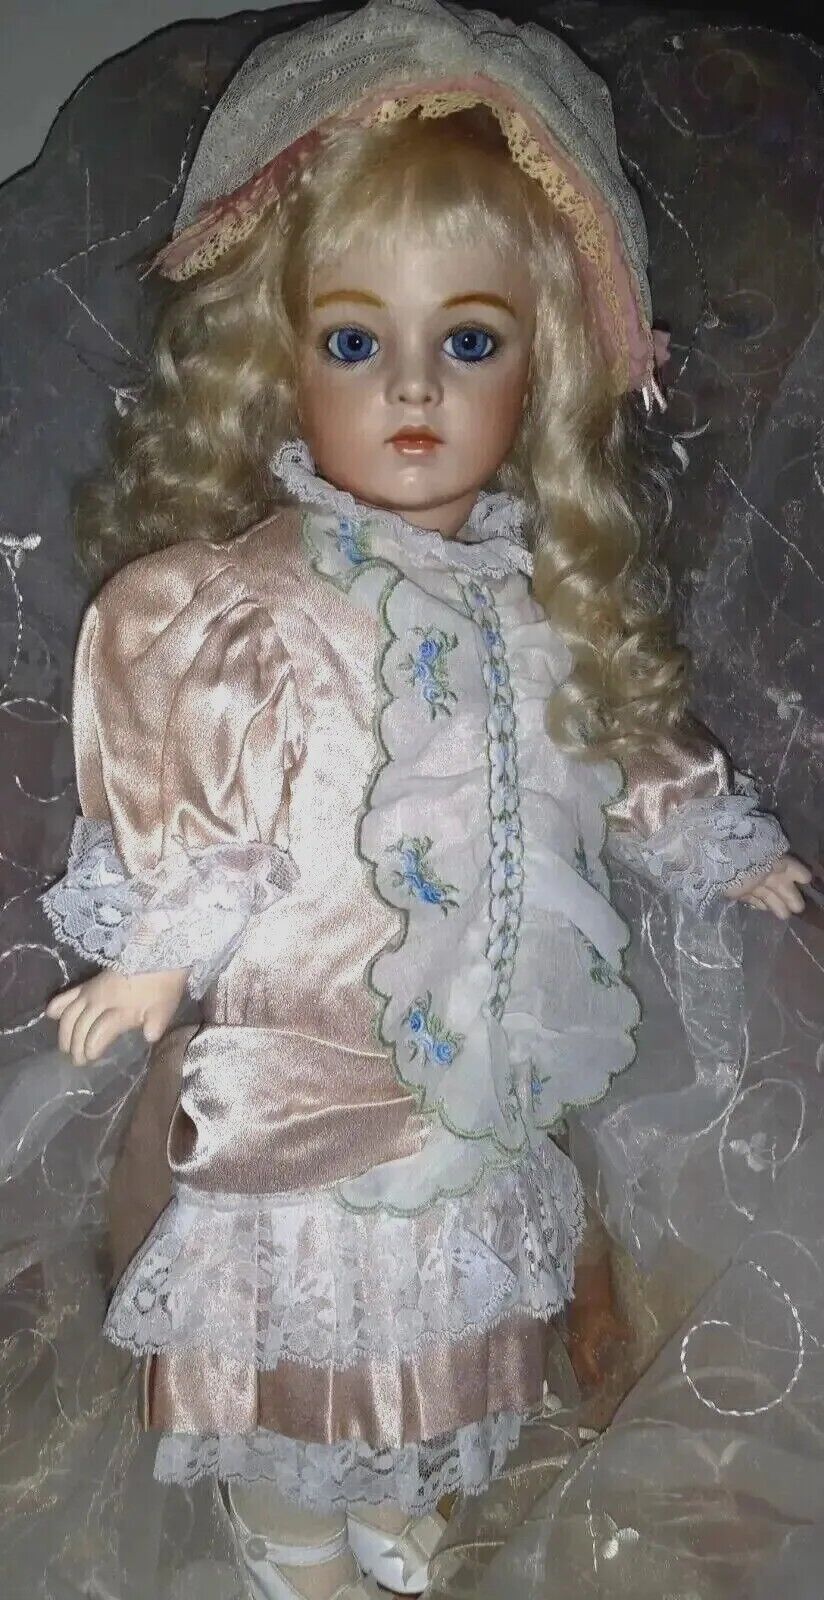 EMILY HART STUNNING FRENCH ANTIQUE REPRODUCTION BRU  DOLL 22 IN. WENDY FEDIT WIG